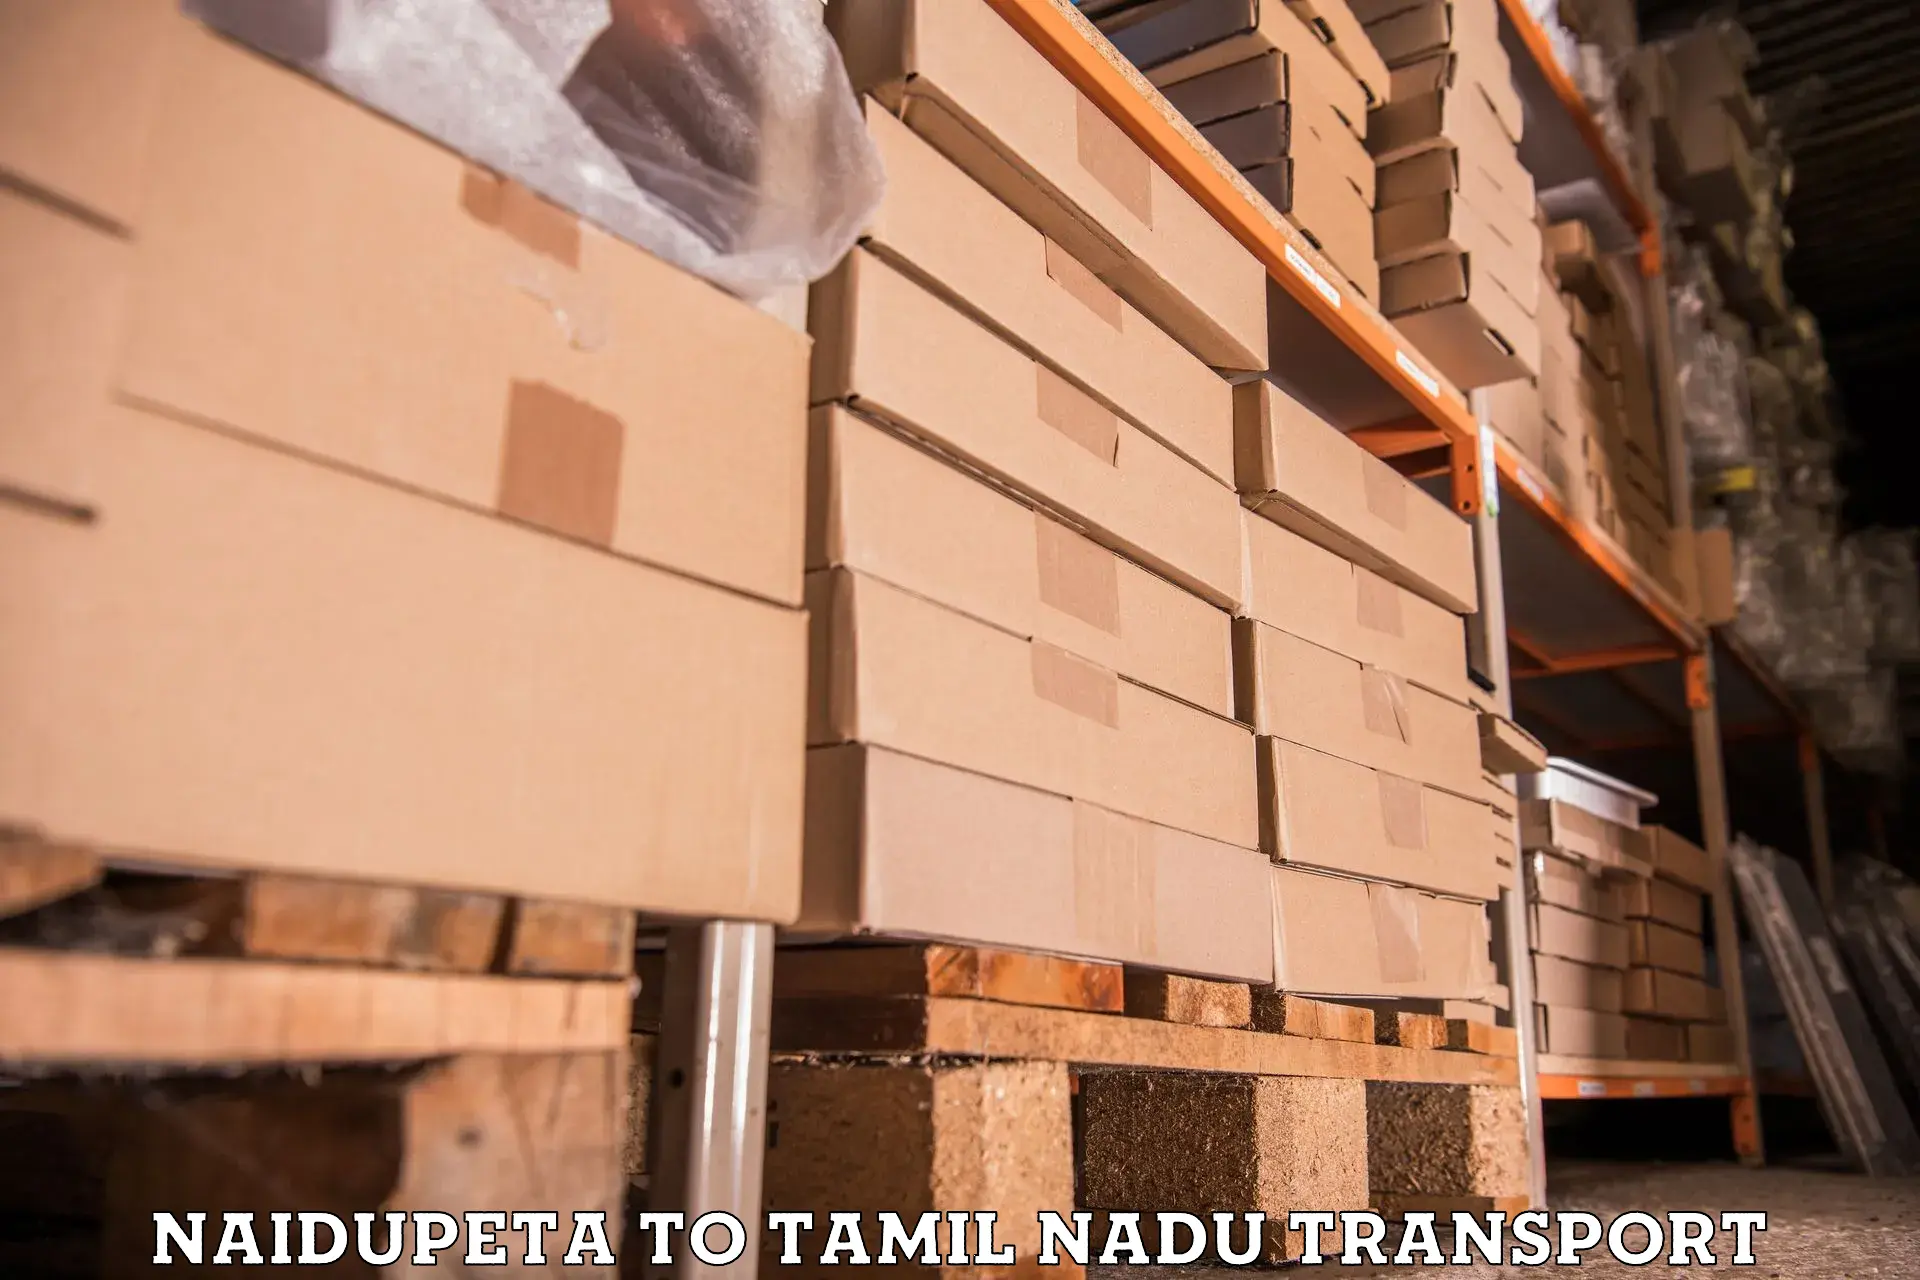 Transport bike from one state to another Naidupeta to Tamil Nadu